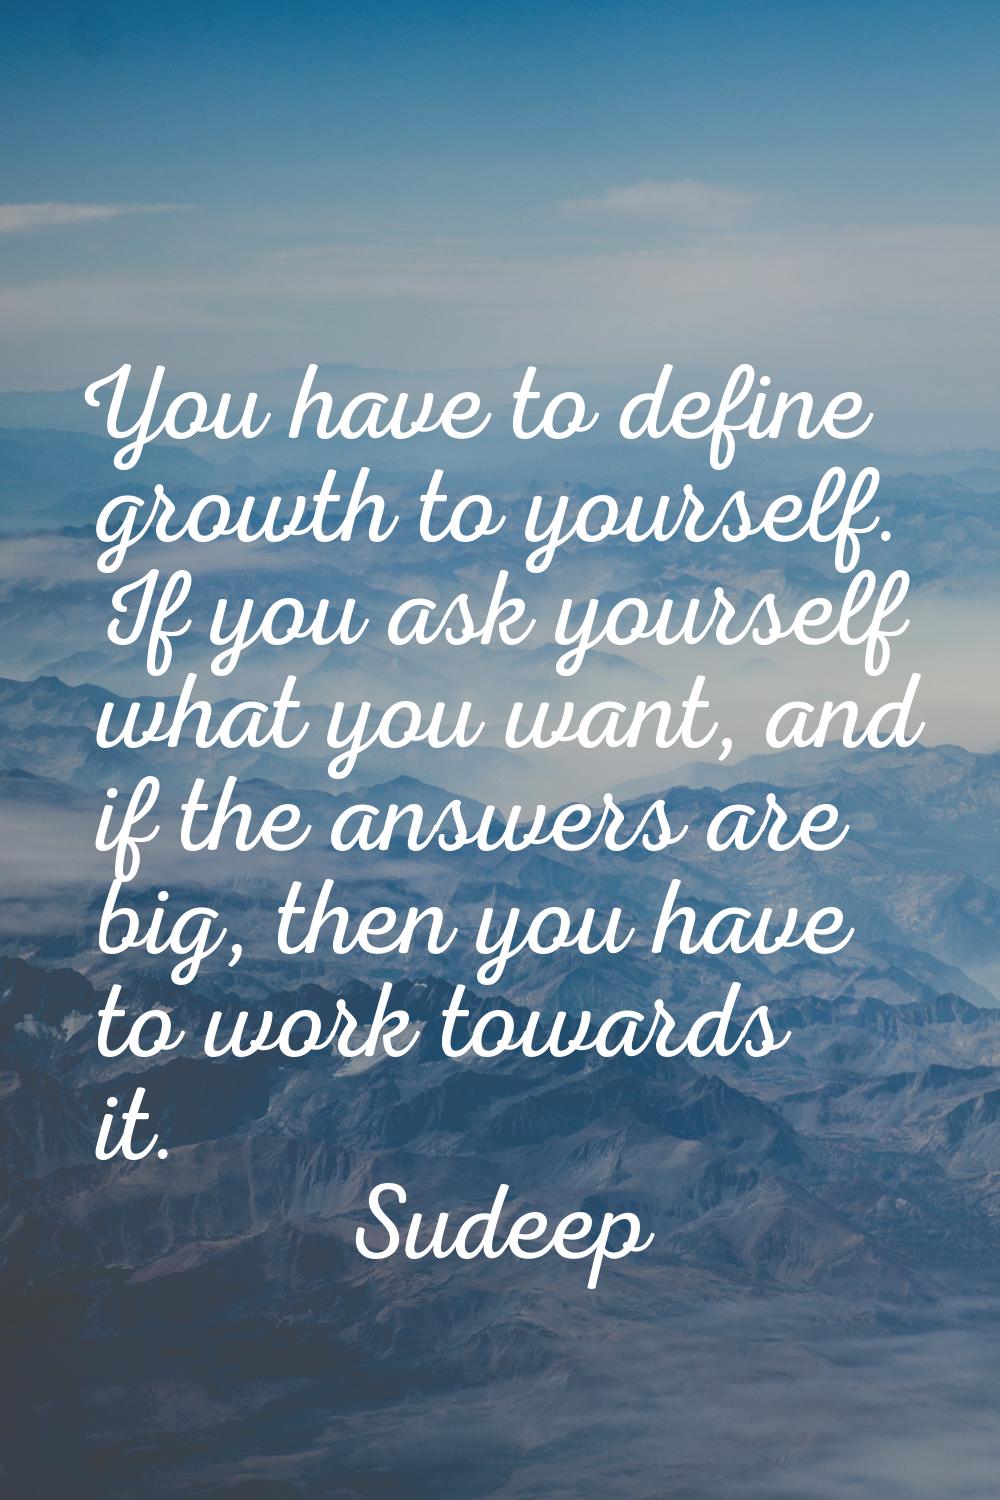 You have to define growth to yourself. If you ask yourself what you want, and if the answers are bi